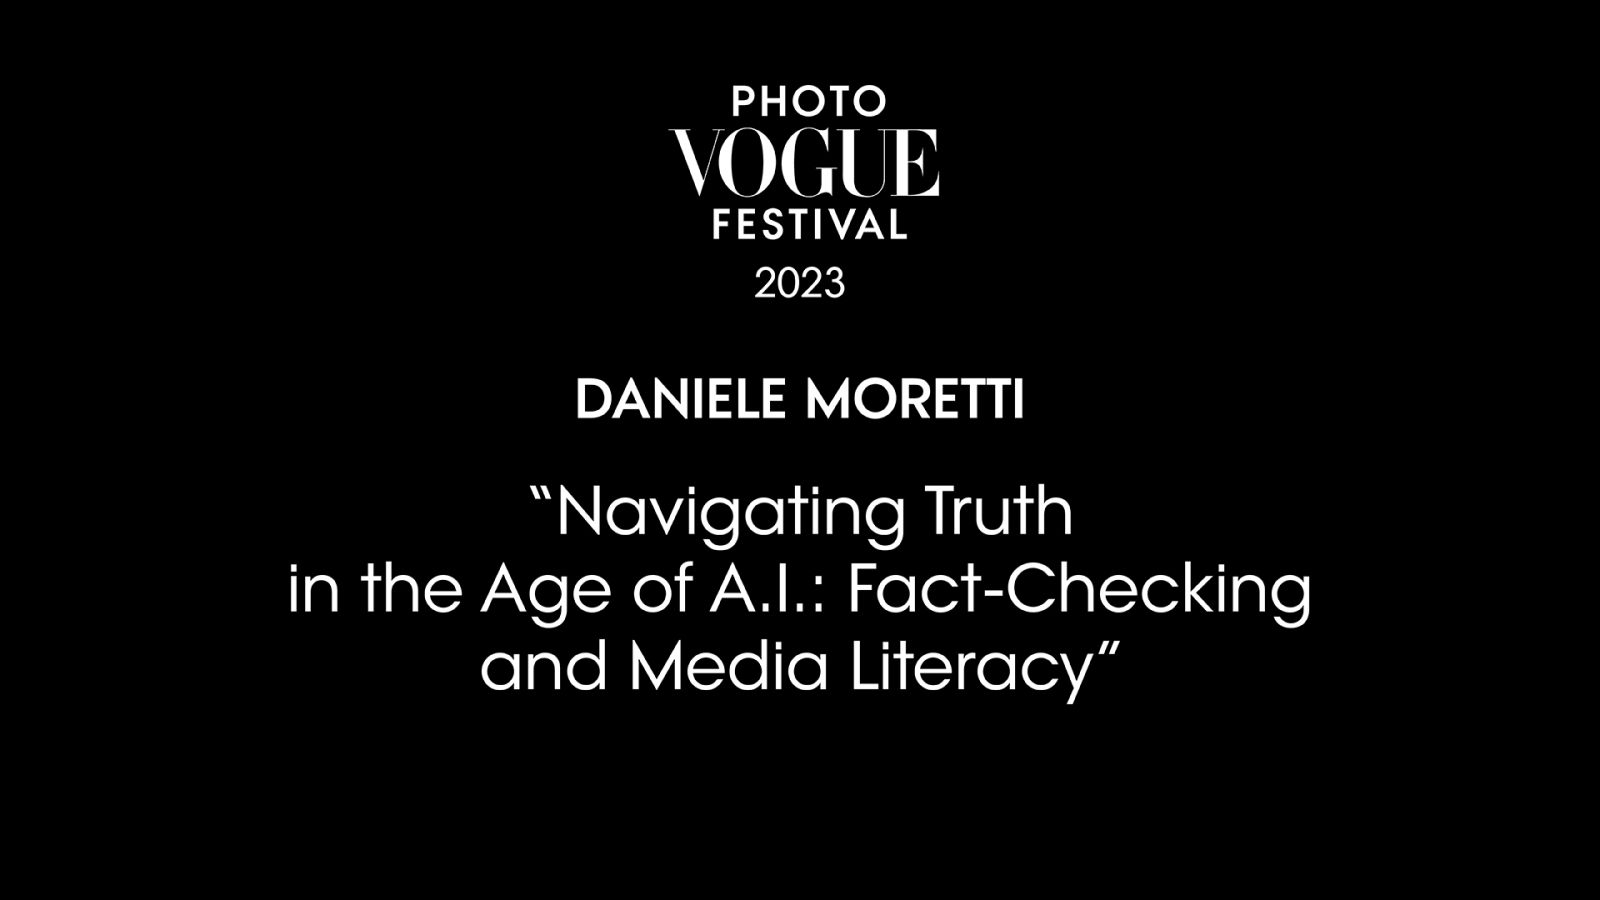 Navigating Truth in the Age of A.I.: Fact-Checking and Media Literacy | PhotoVogue Festival 2023: What Makes Us Human? Image in the Age of A.I.